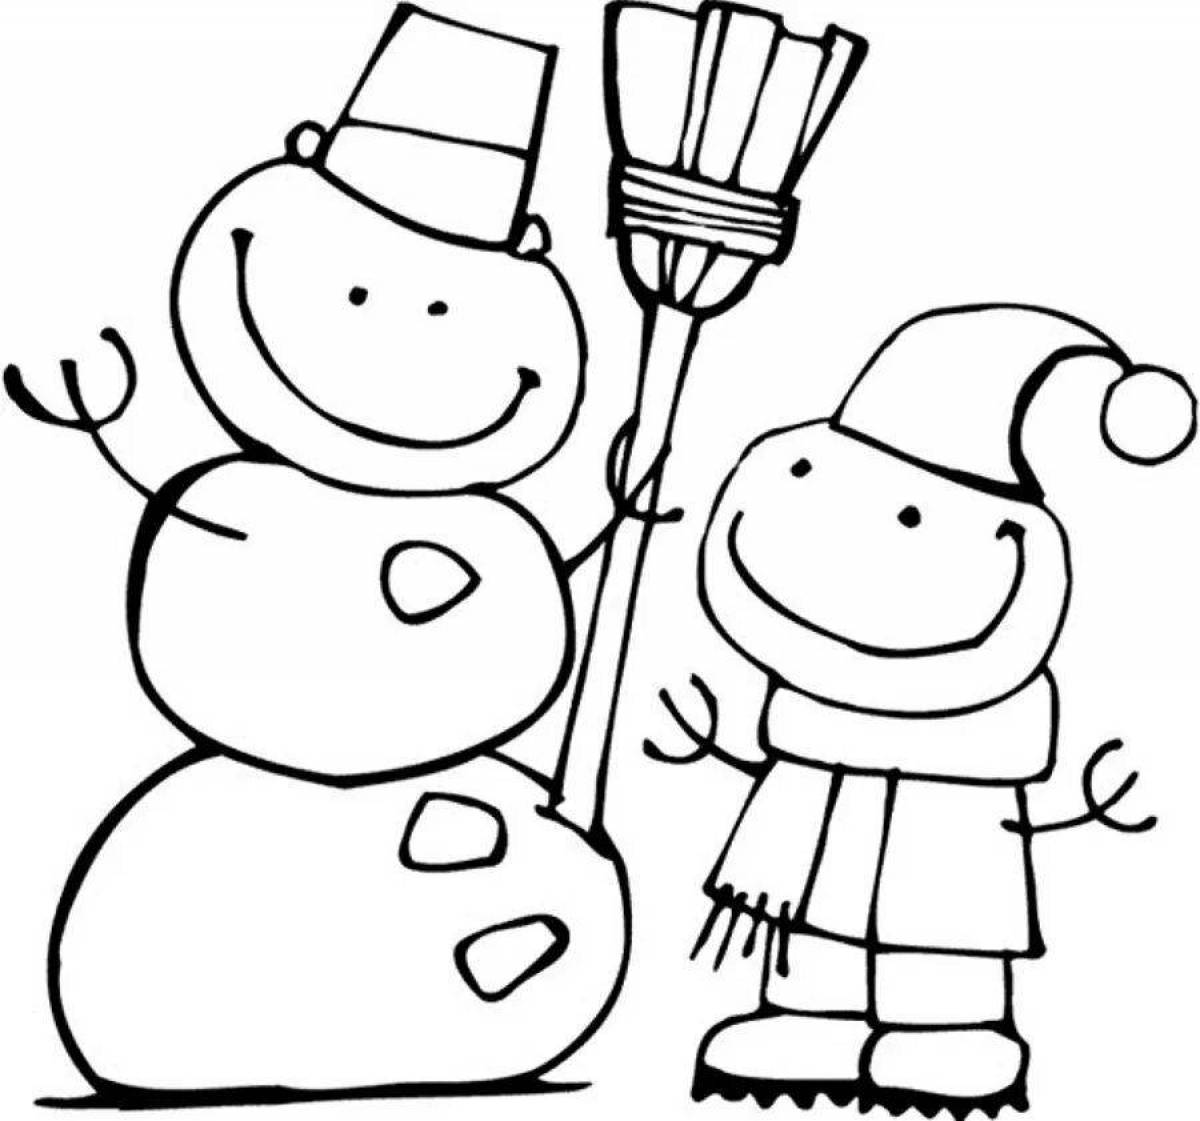 Coloring page festive snowman birthday